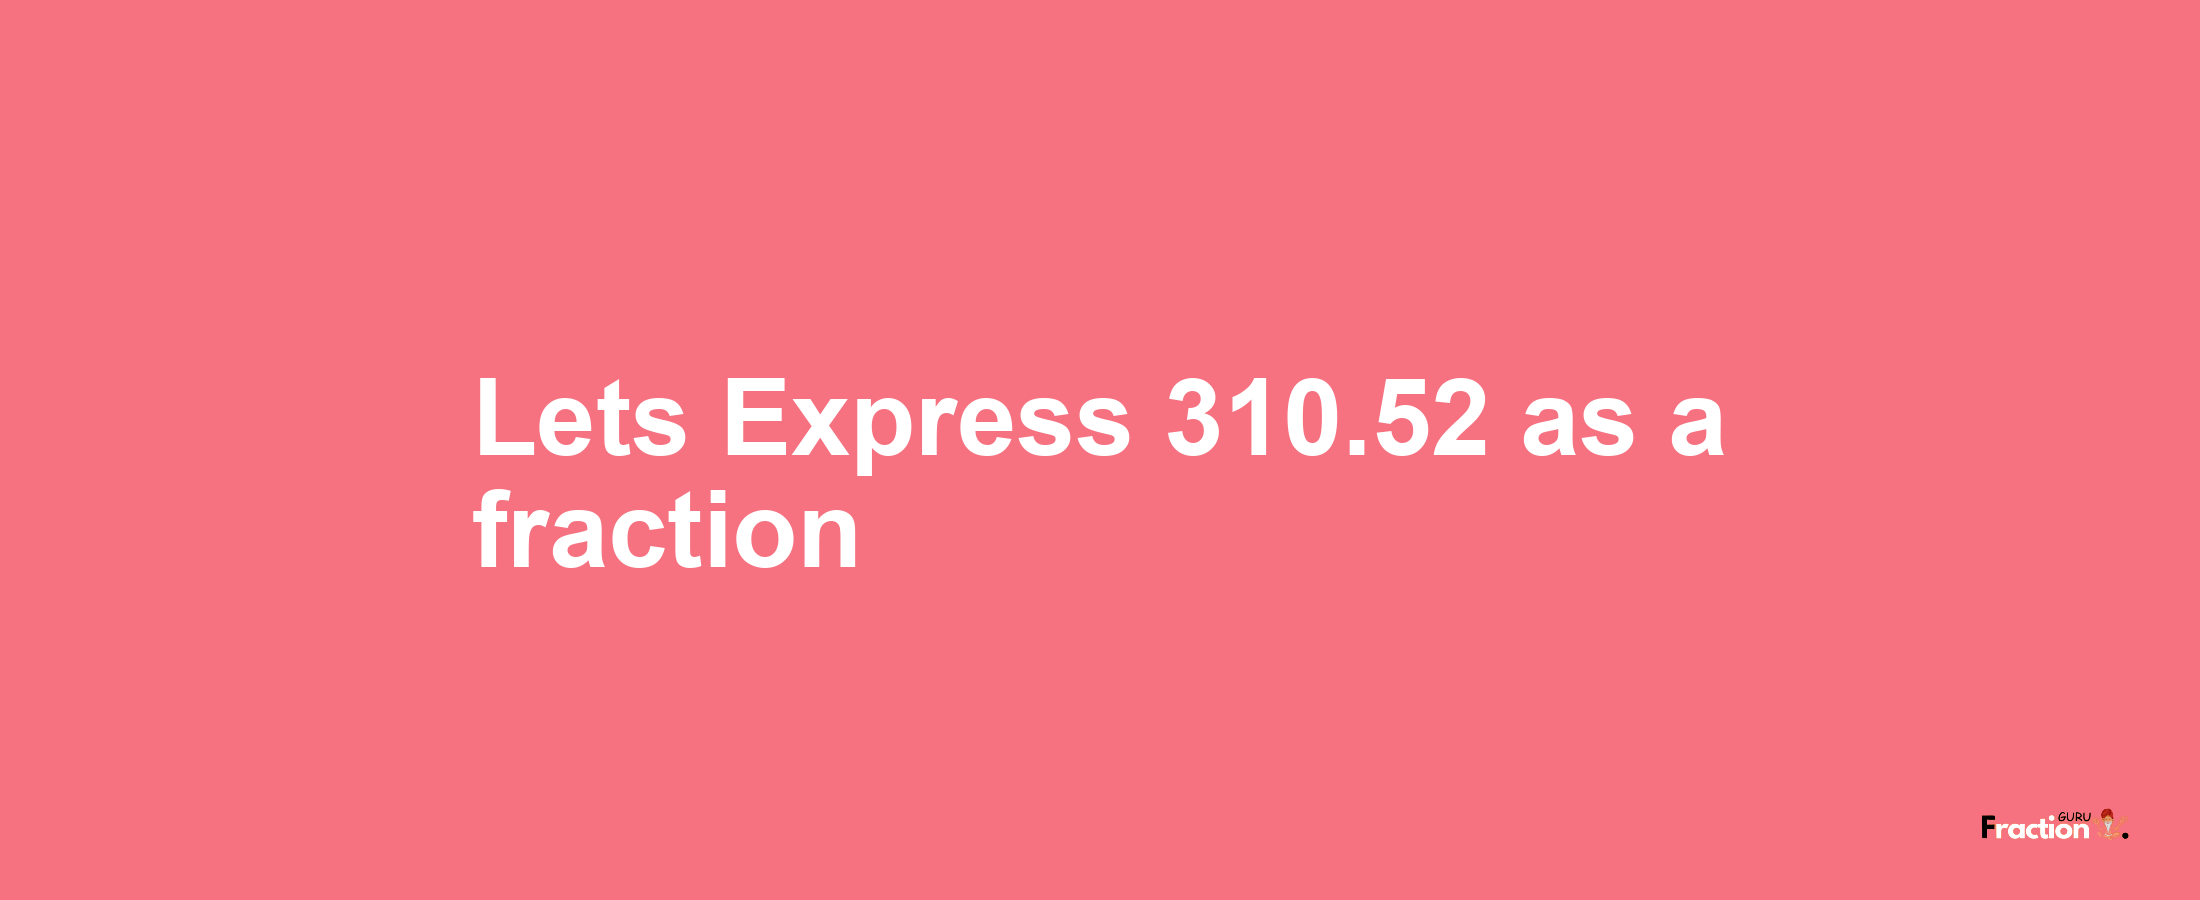 Lets Express 310.52 as afraction